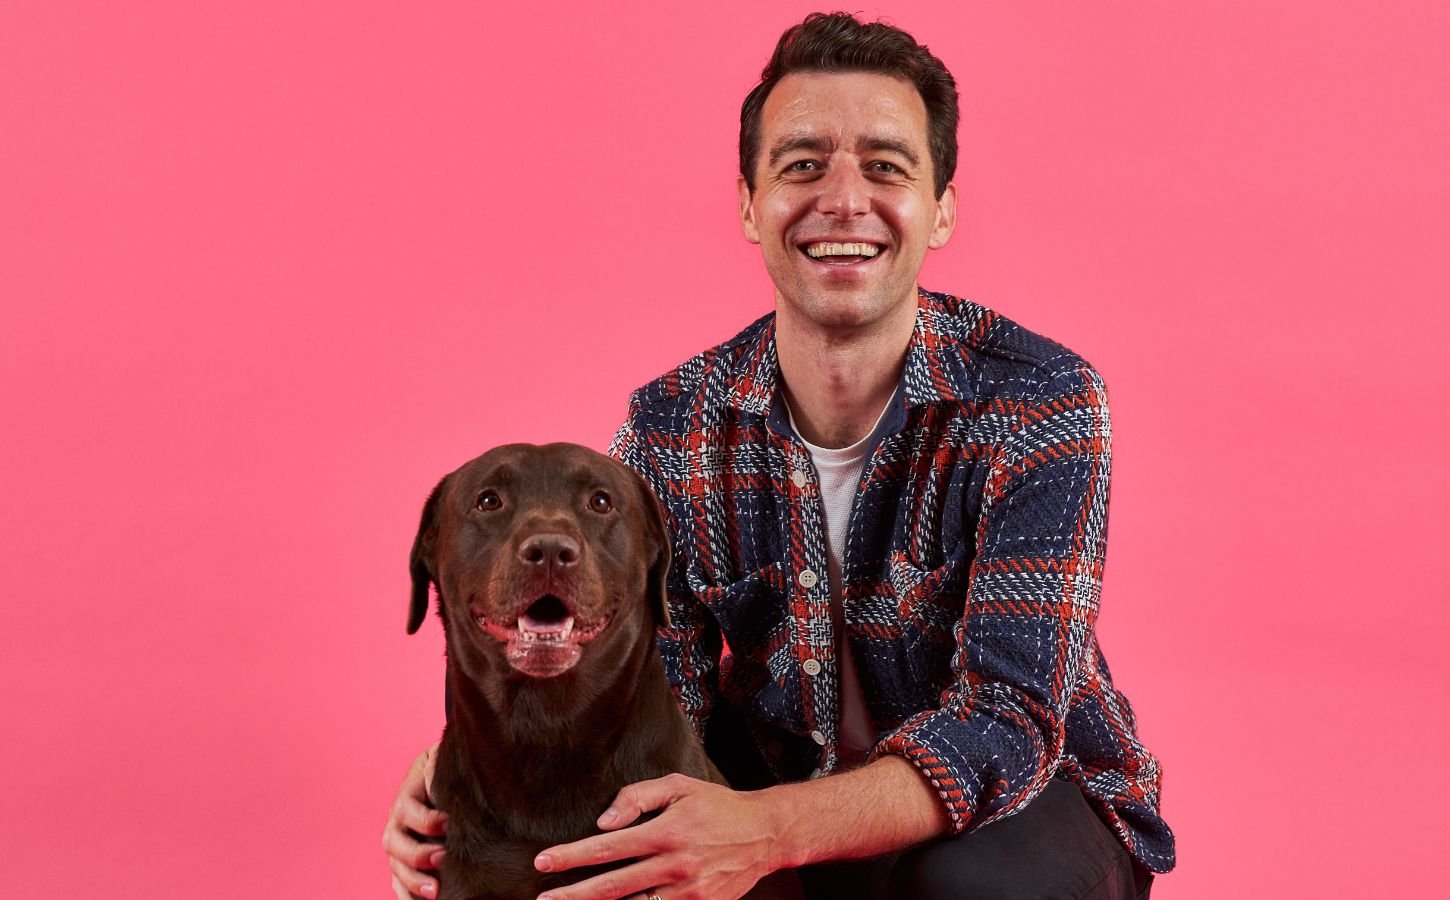 Cultivated meat pet food company Meatly CEO Owen Ensor poses with a brown dog in front of a pink background